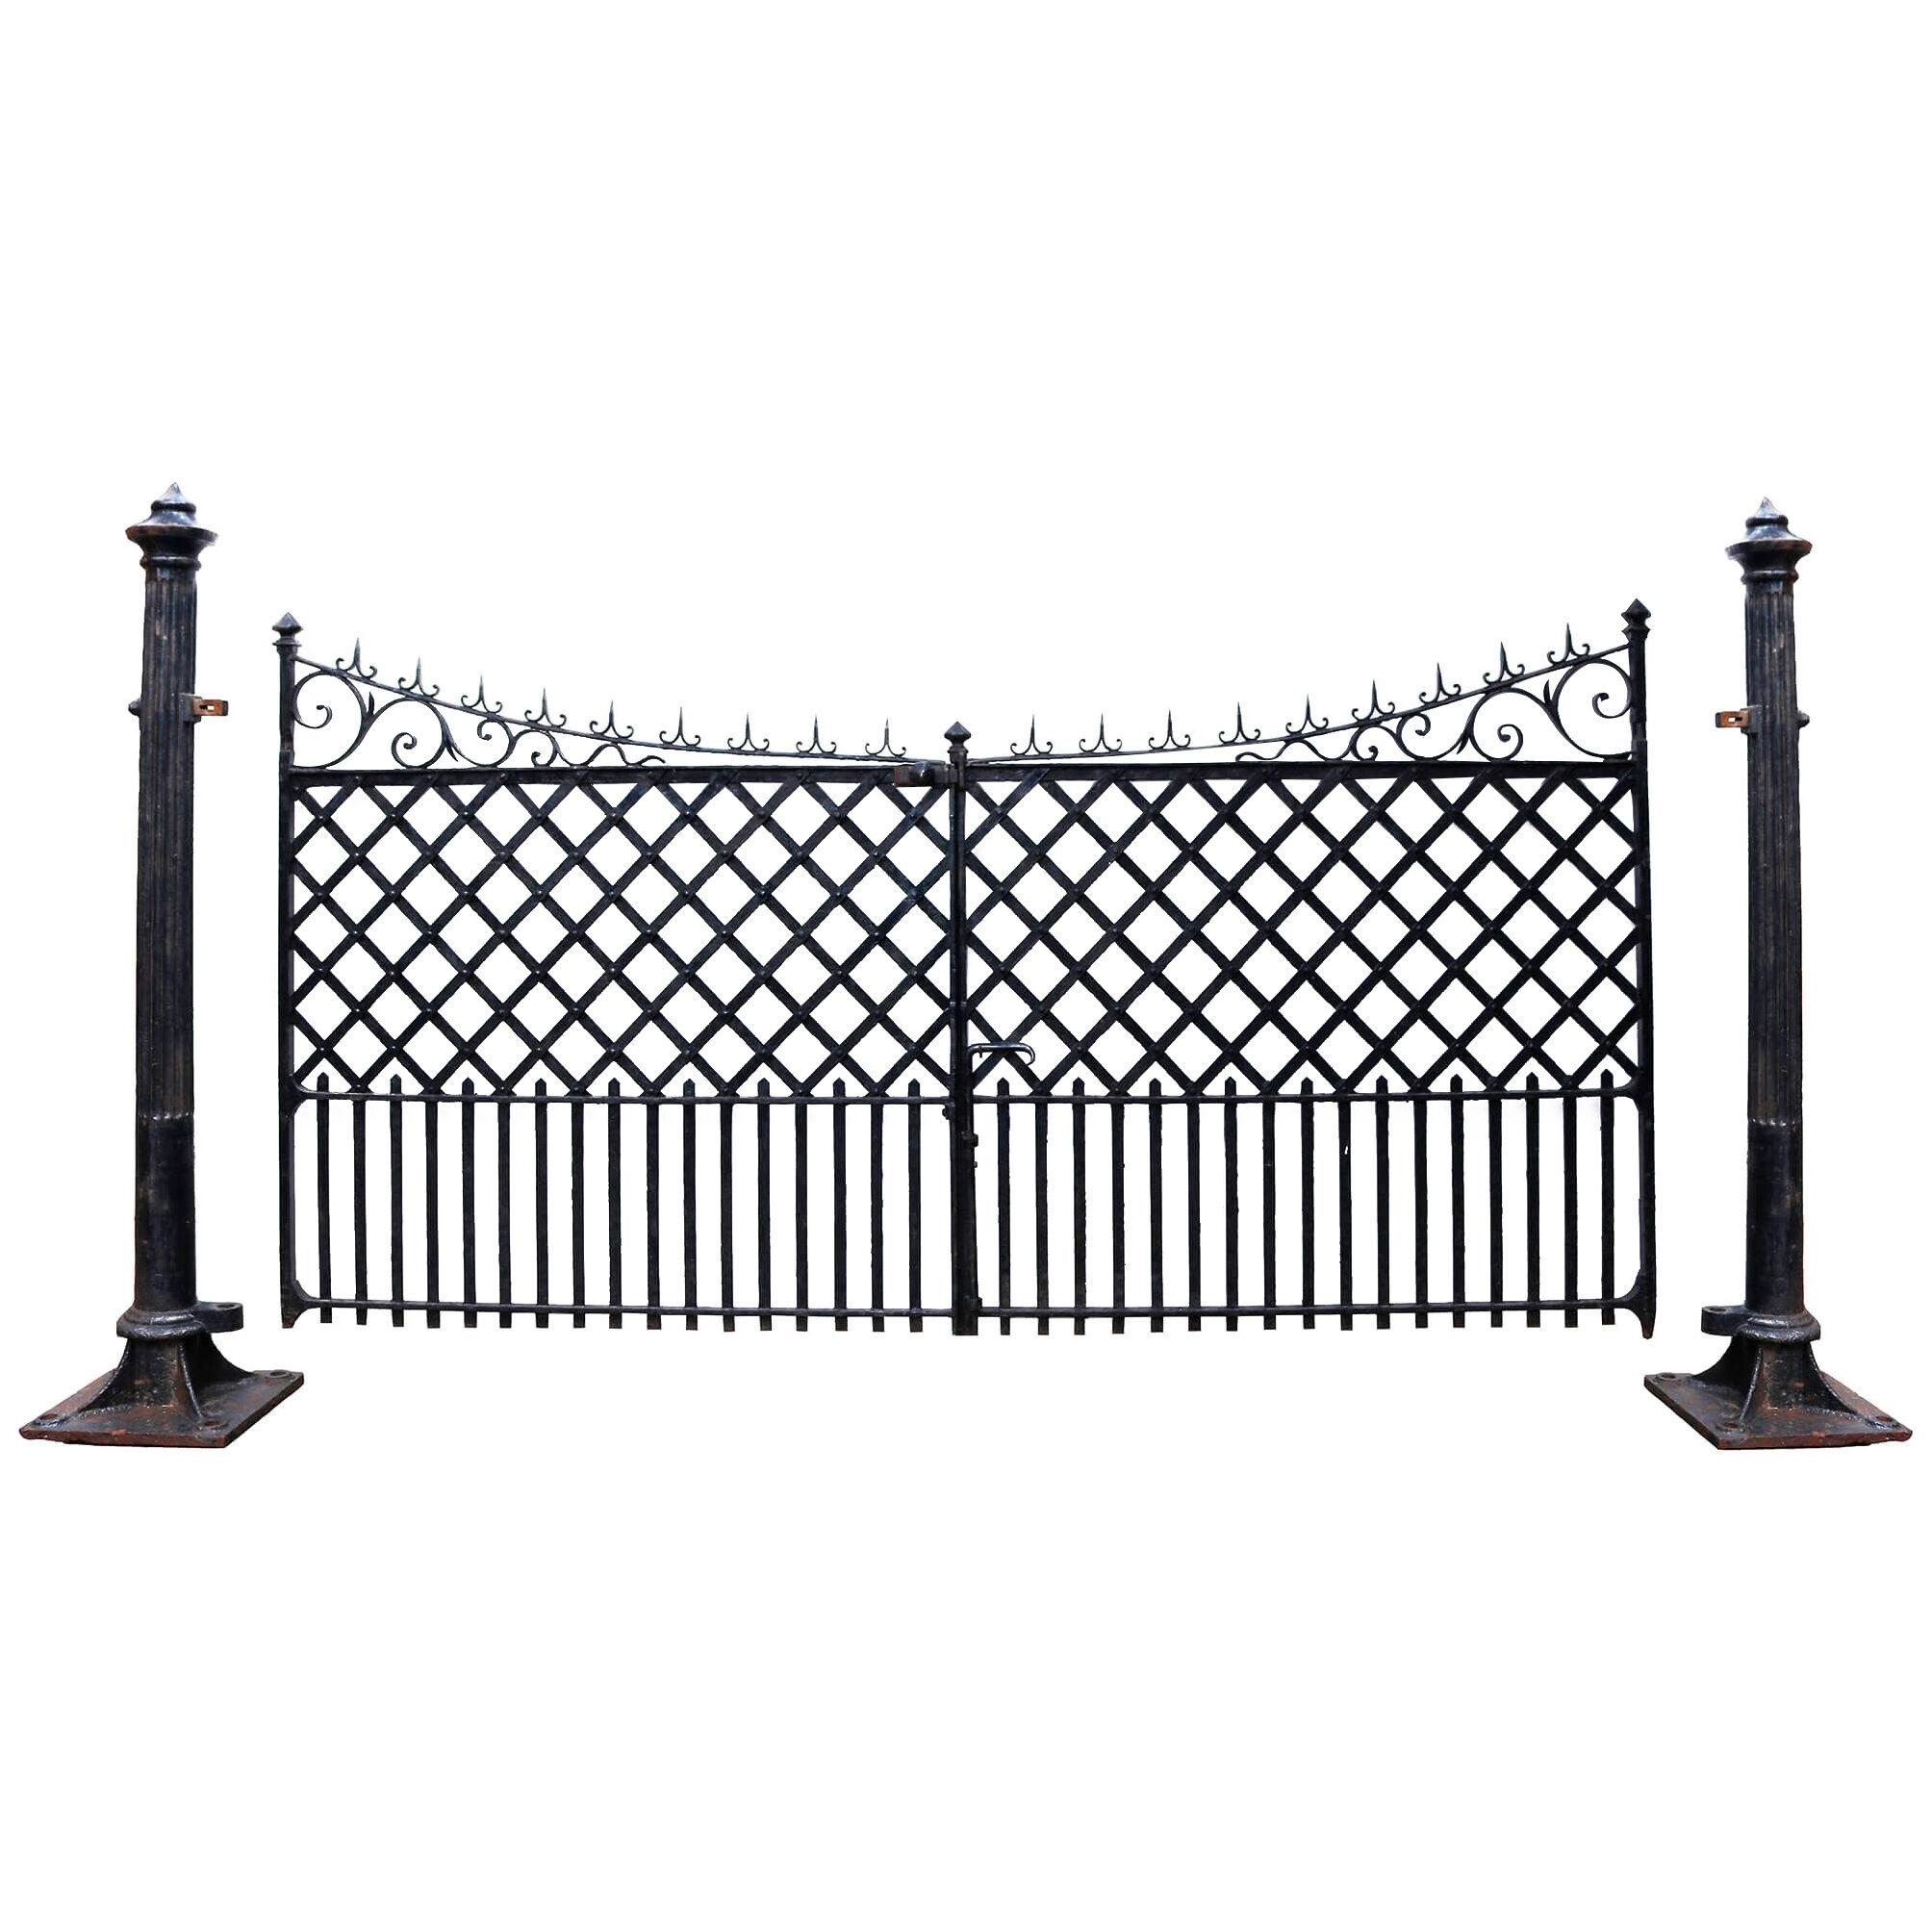 Set of Wrought Iron Driveway Gates and Posts 307 cm (10′)